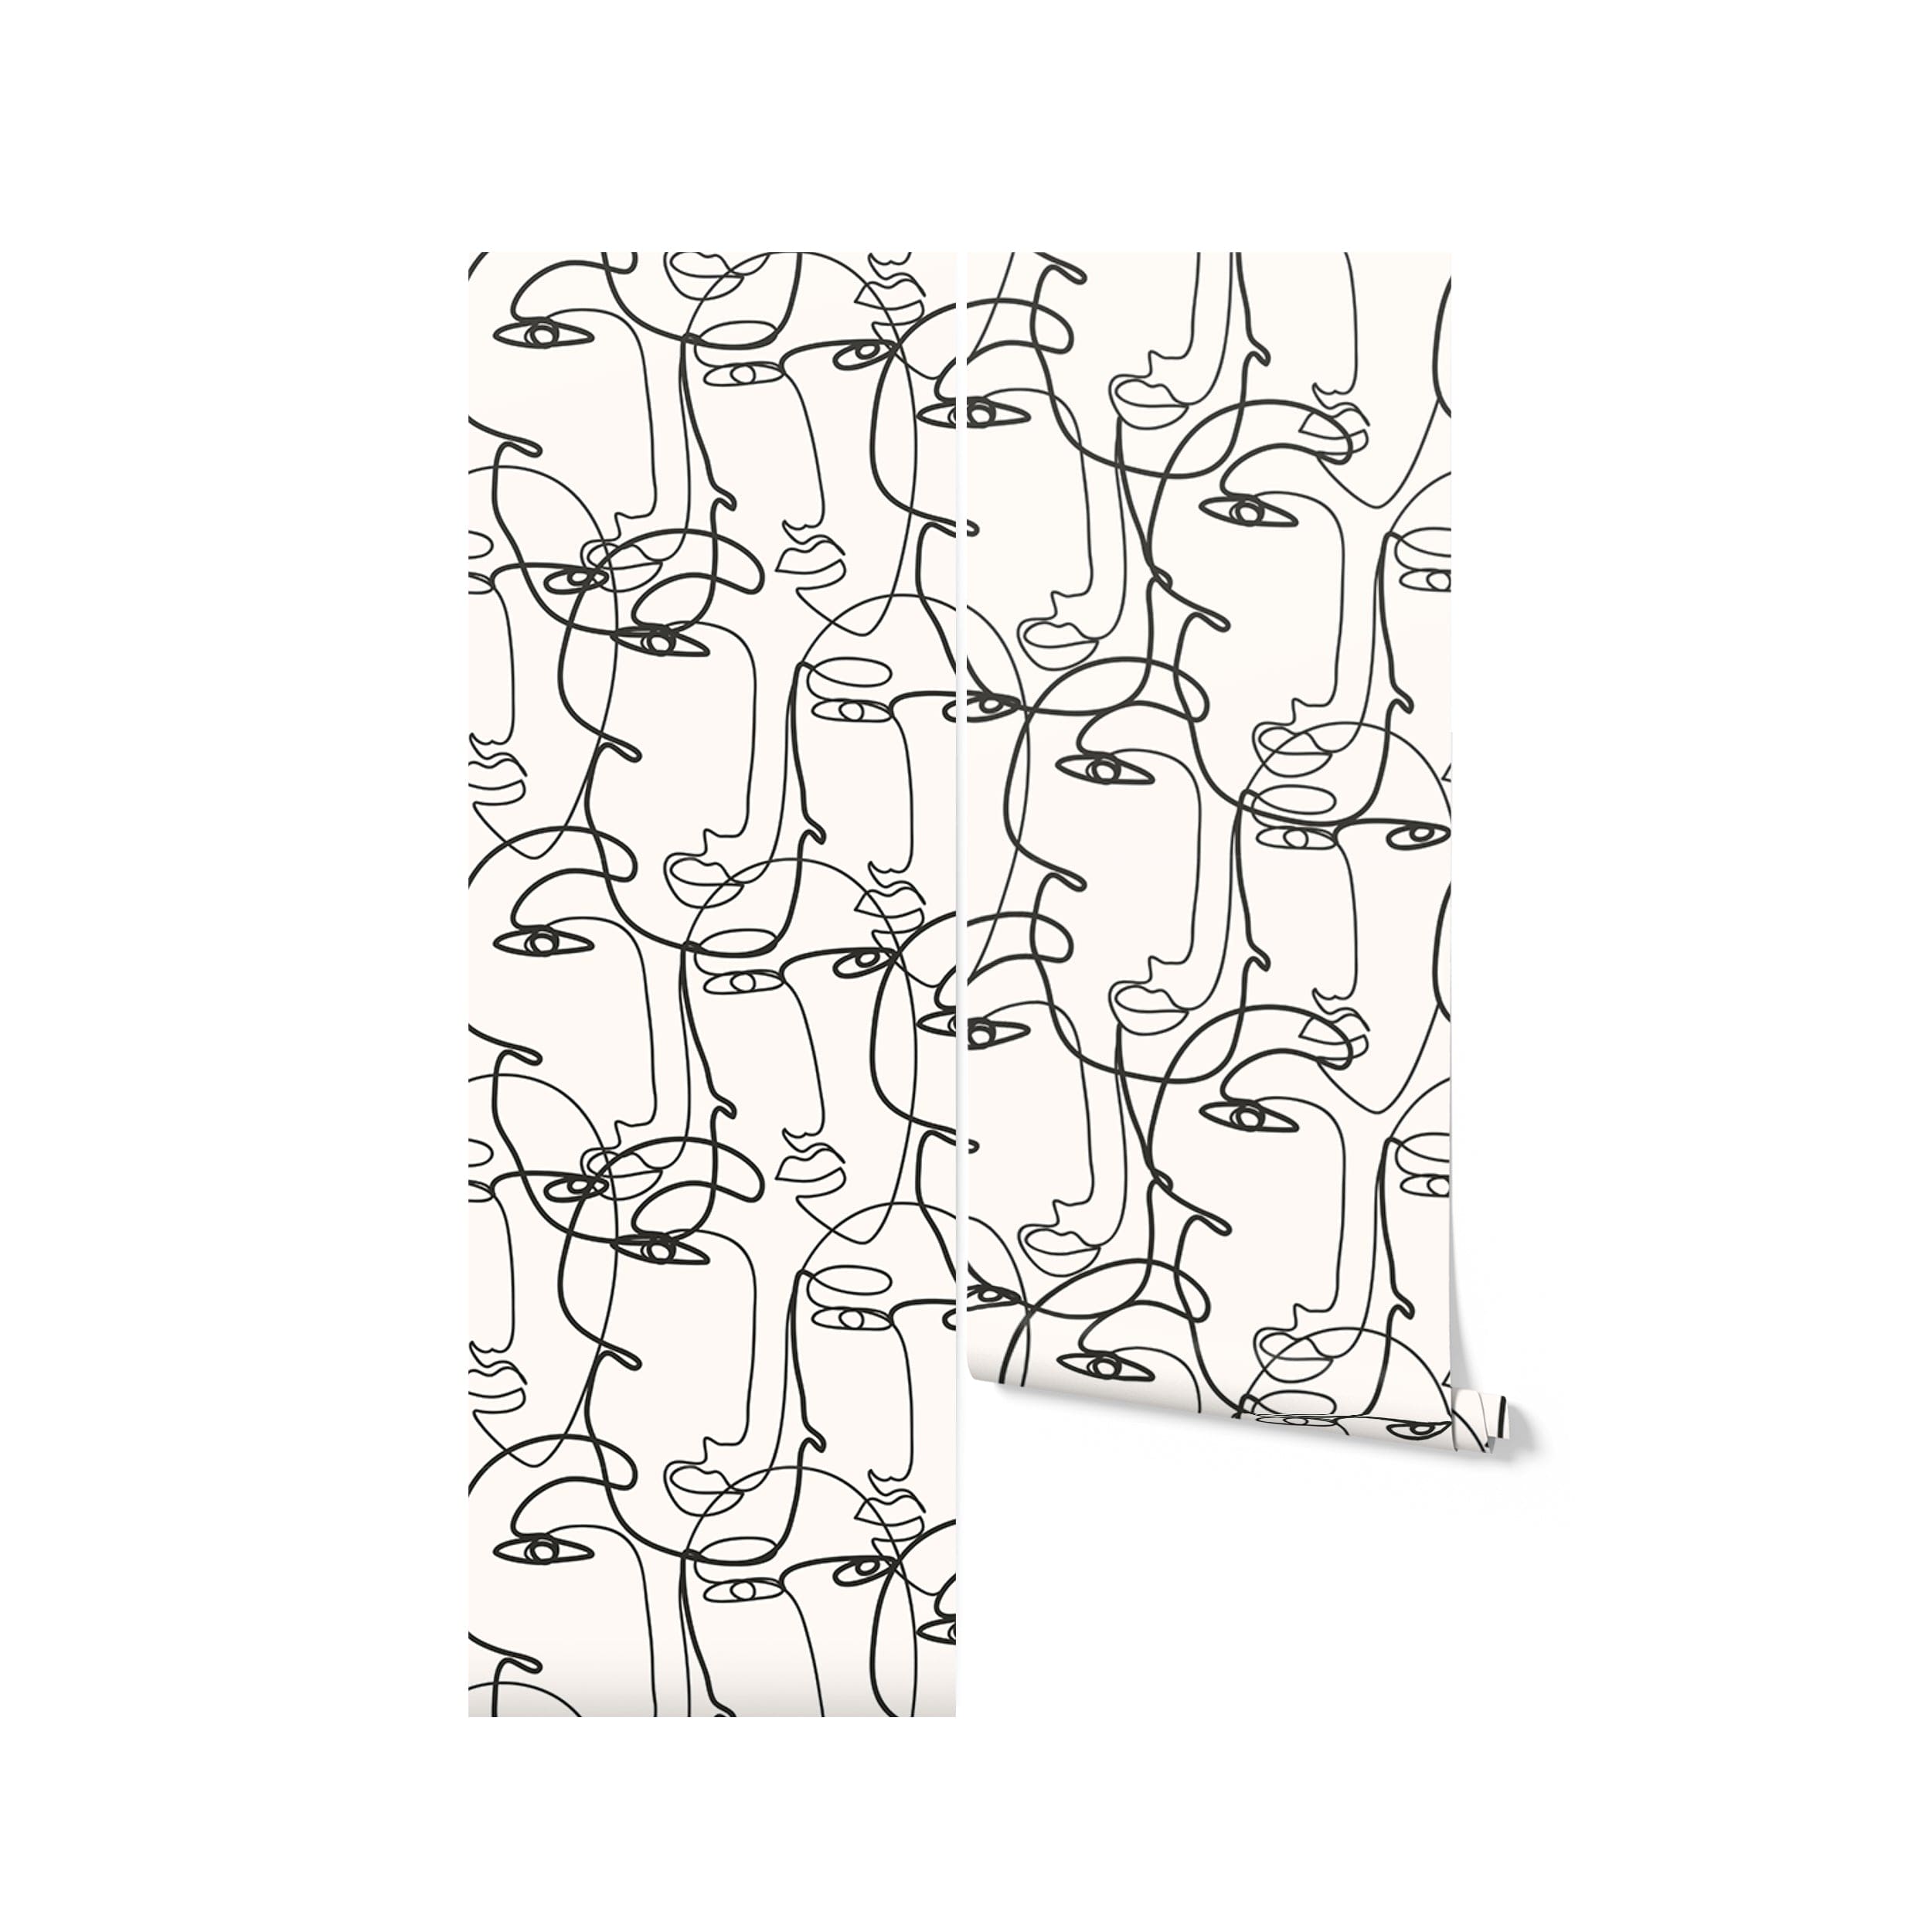 A roll of Minimalist Faces Wallpaper displaying its unique black line art pattern of abstract faces on a white background, ready to enhance any room with its artistic design.